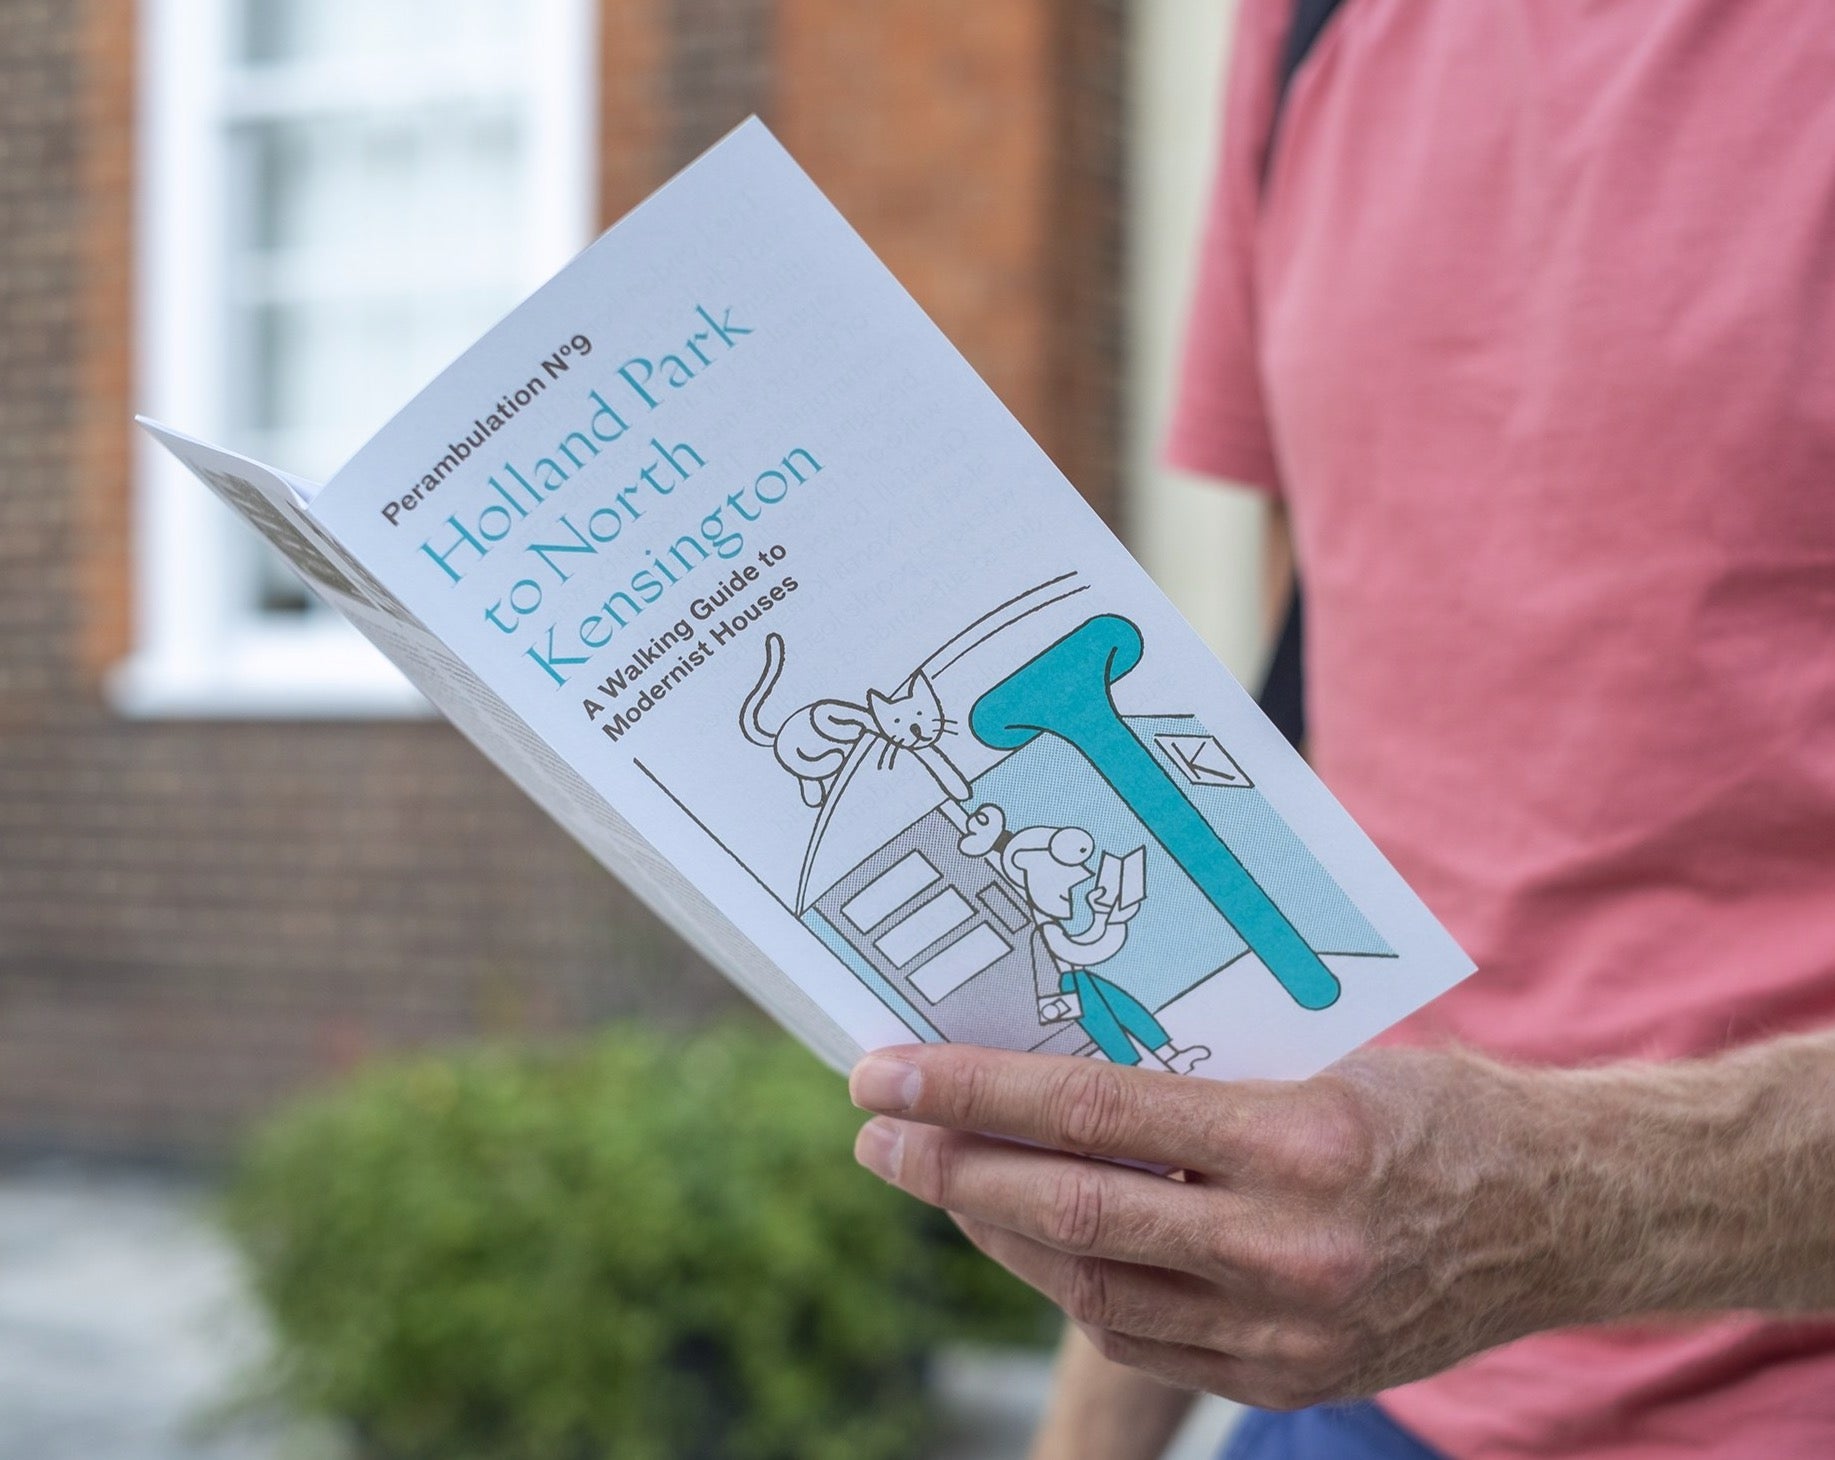 Perambulation Nº9—A Walking Guide to Modernist Houses from Holland Park to North Kensington, West London by Stefi Orazi